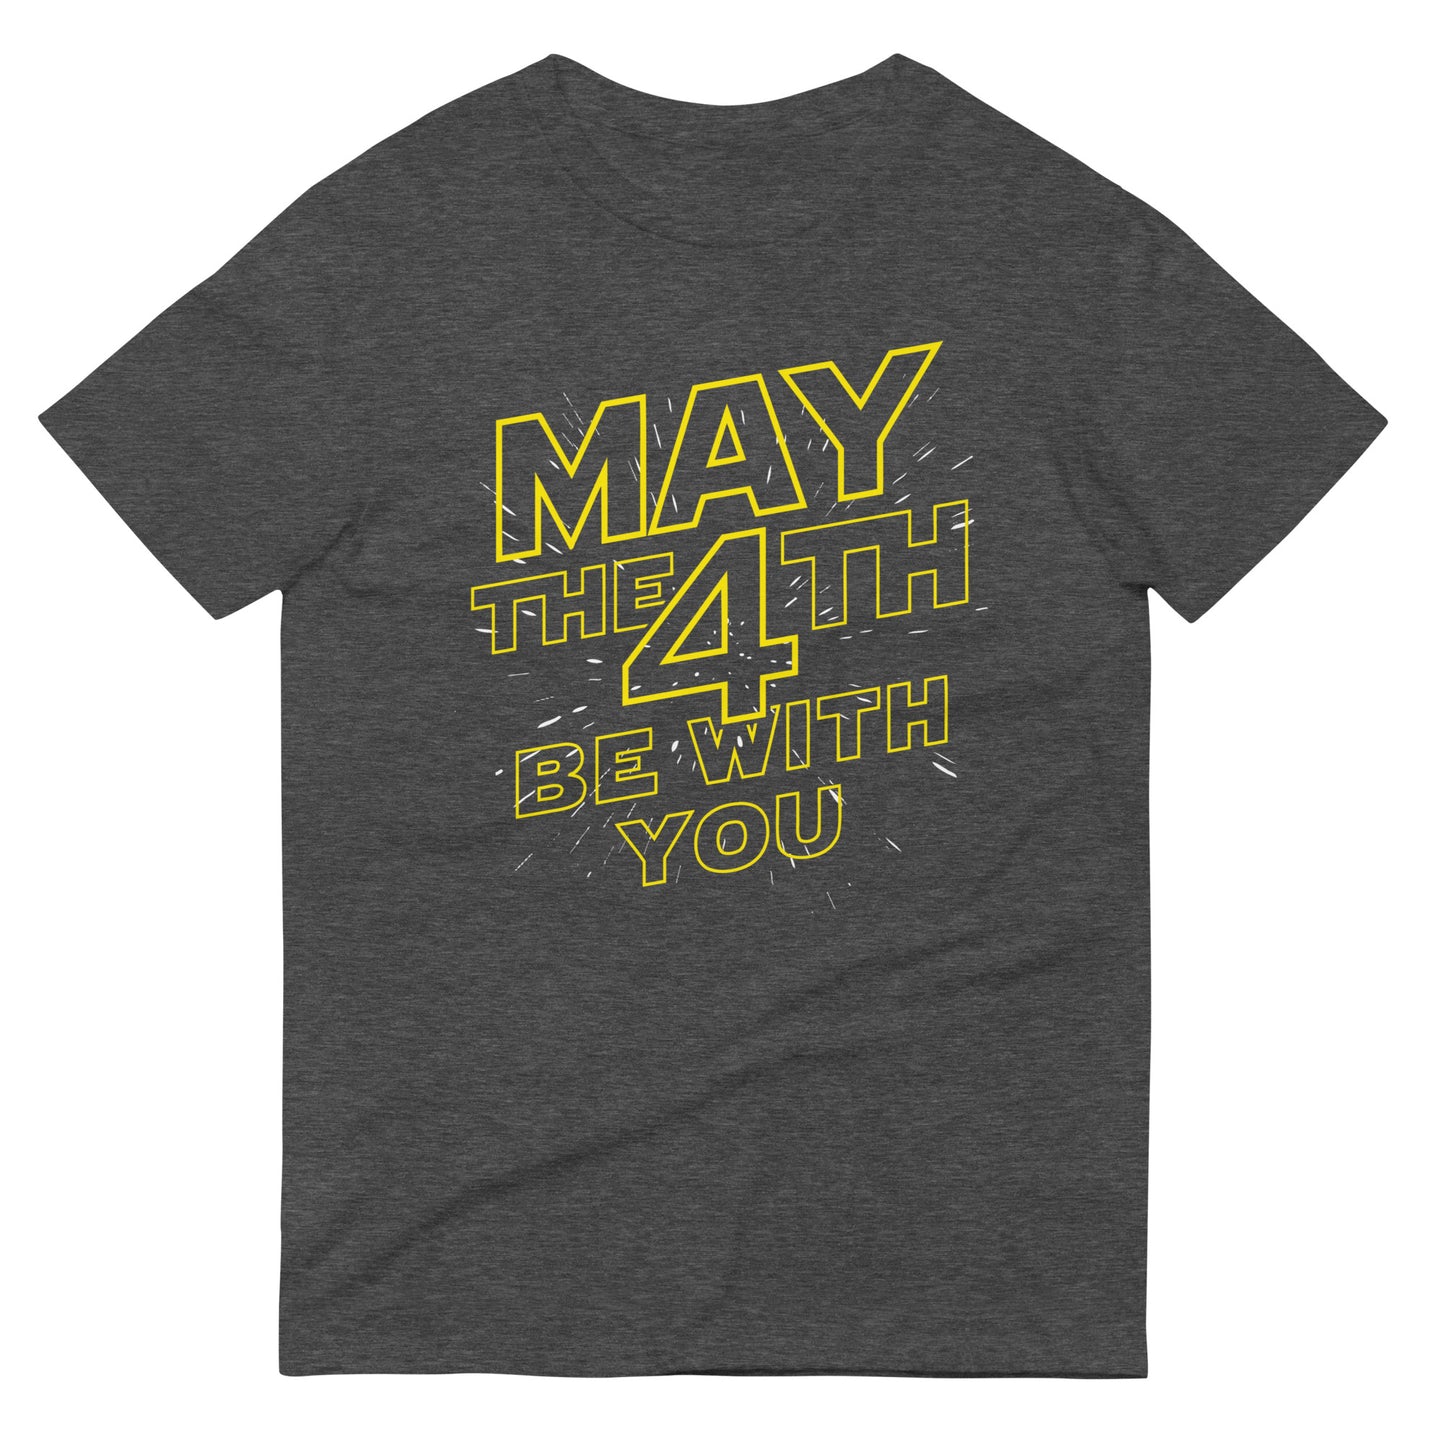 May The 4th Be With You Men's Signature Tee